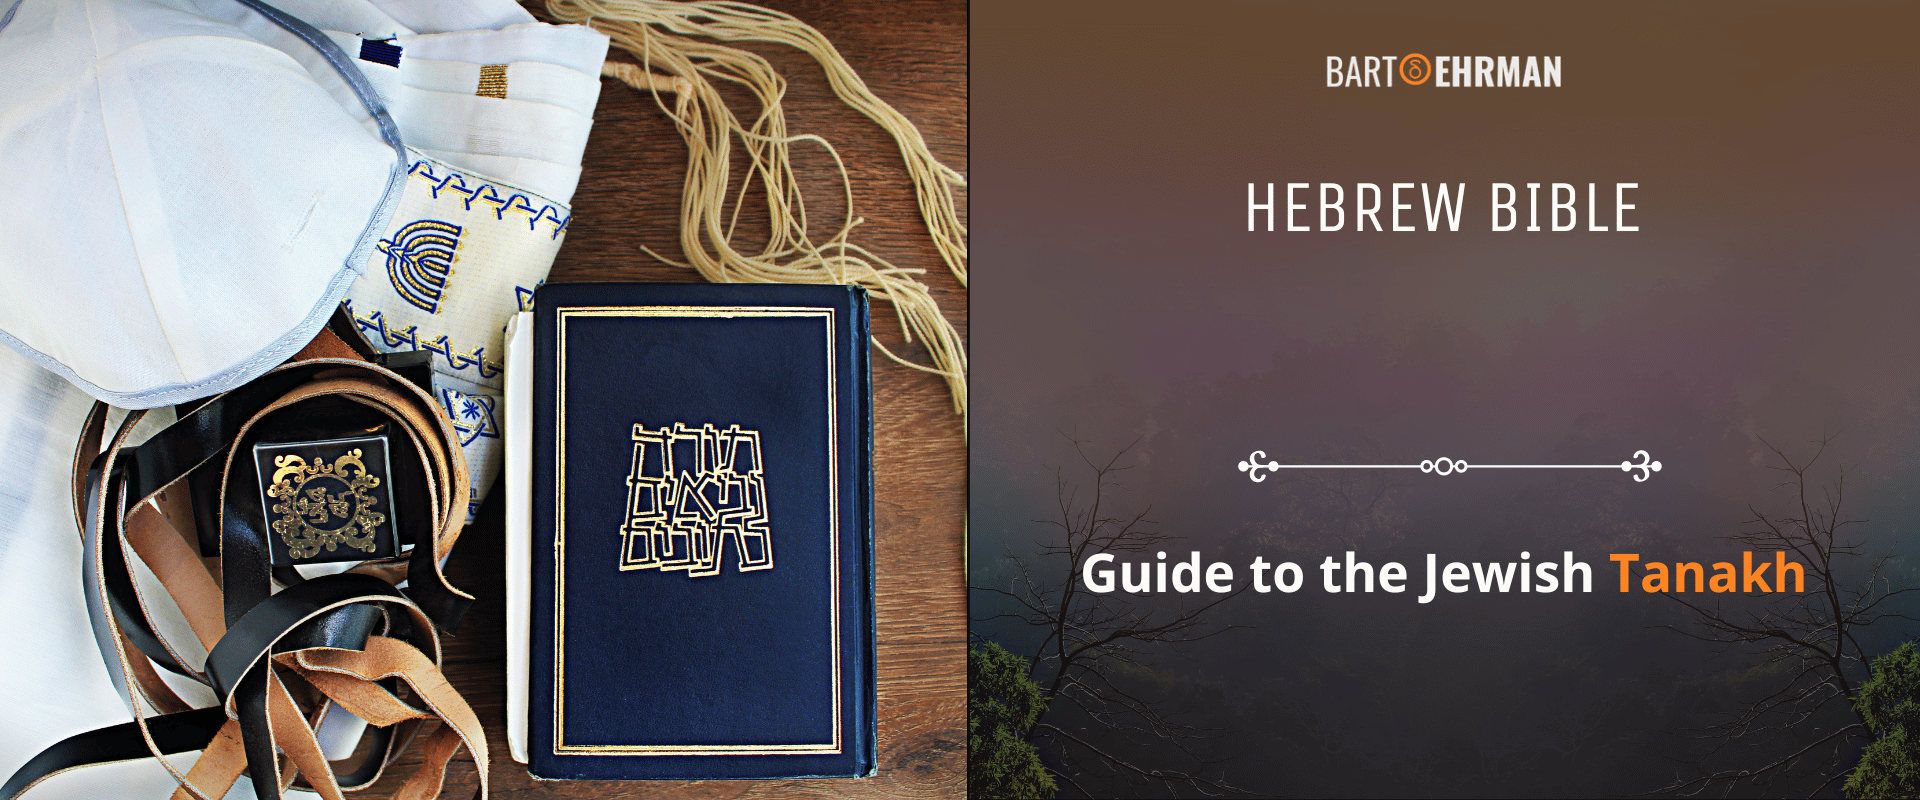 Hebrew Bible - Guide to the Jewish Tanakh